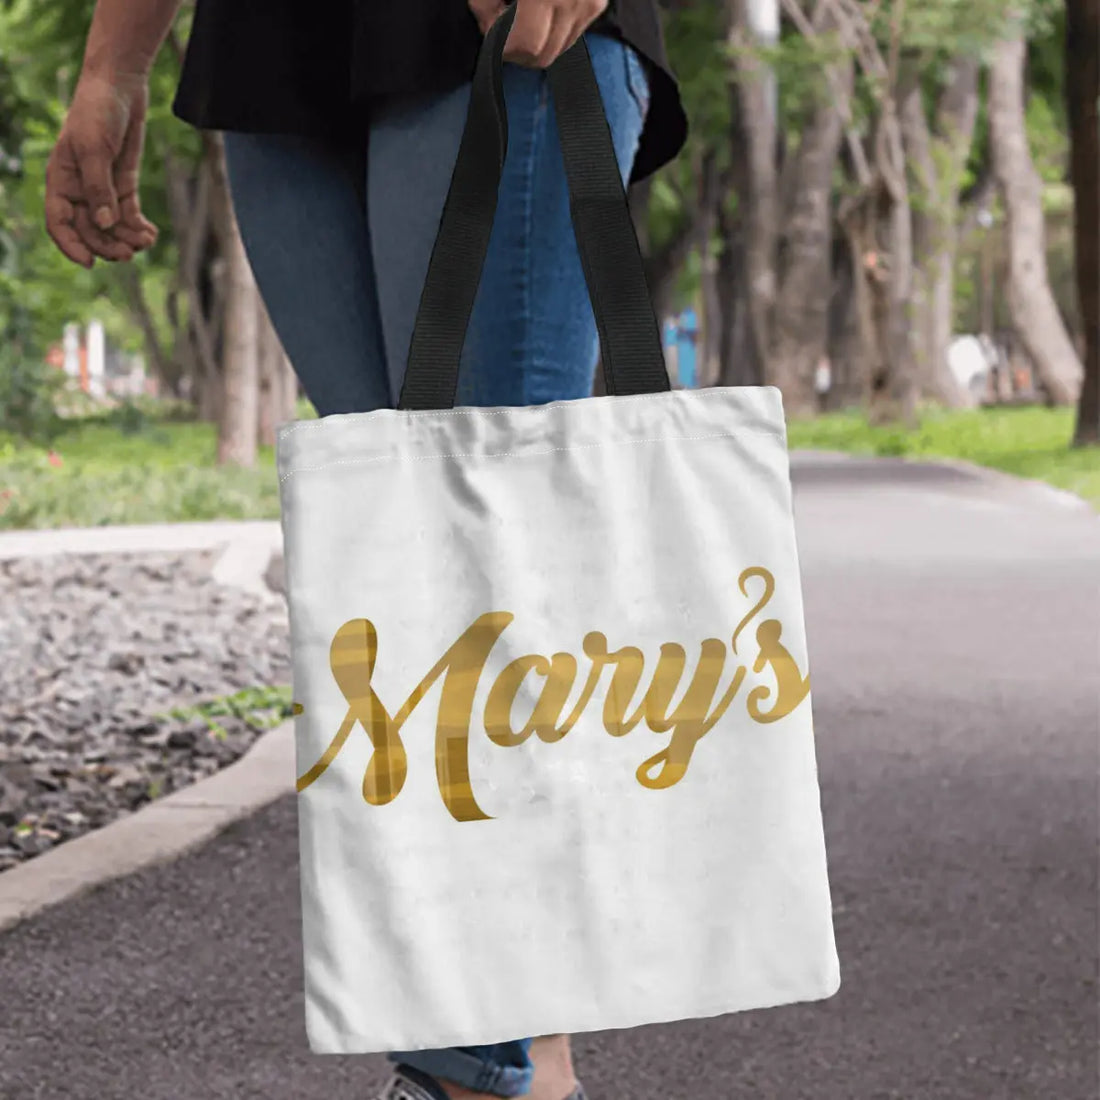 Tote Bag - Mary’s TT Shop